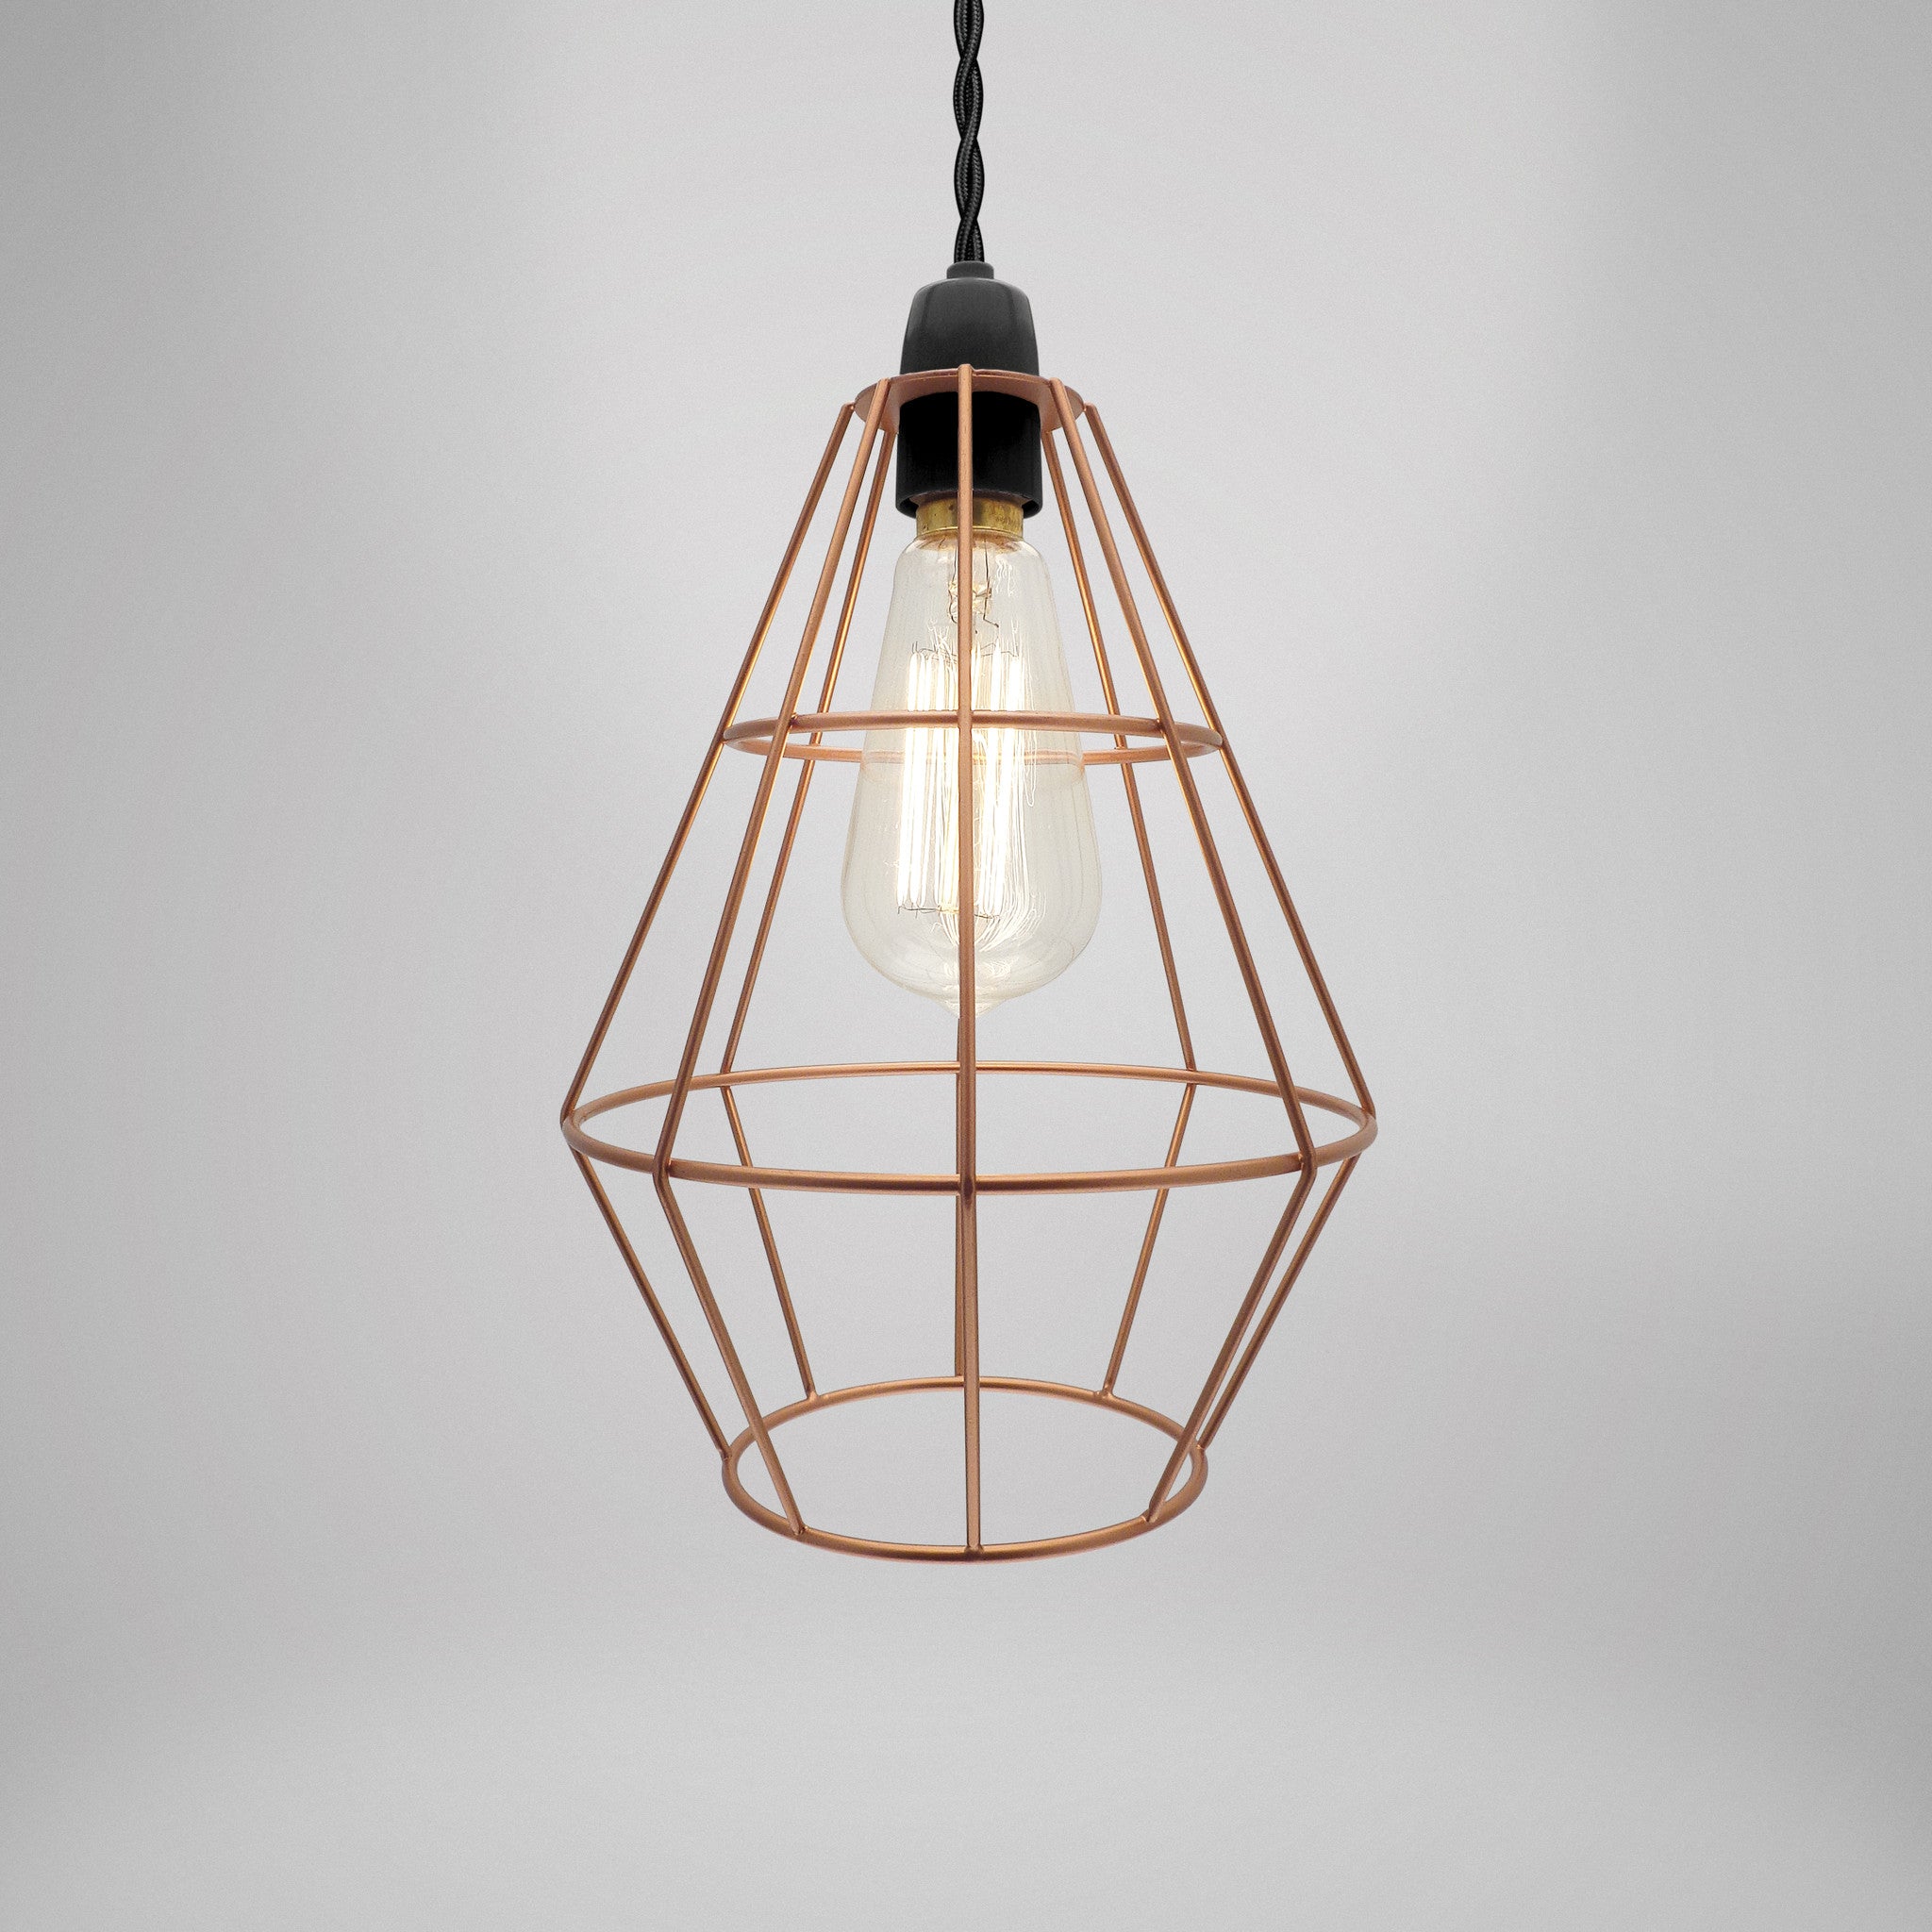 Modern Industrial Style Metal Light Fitting